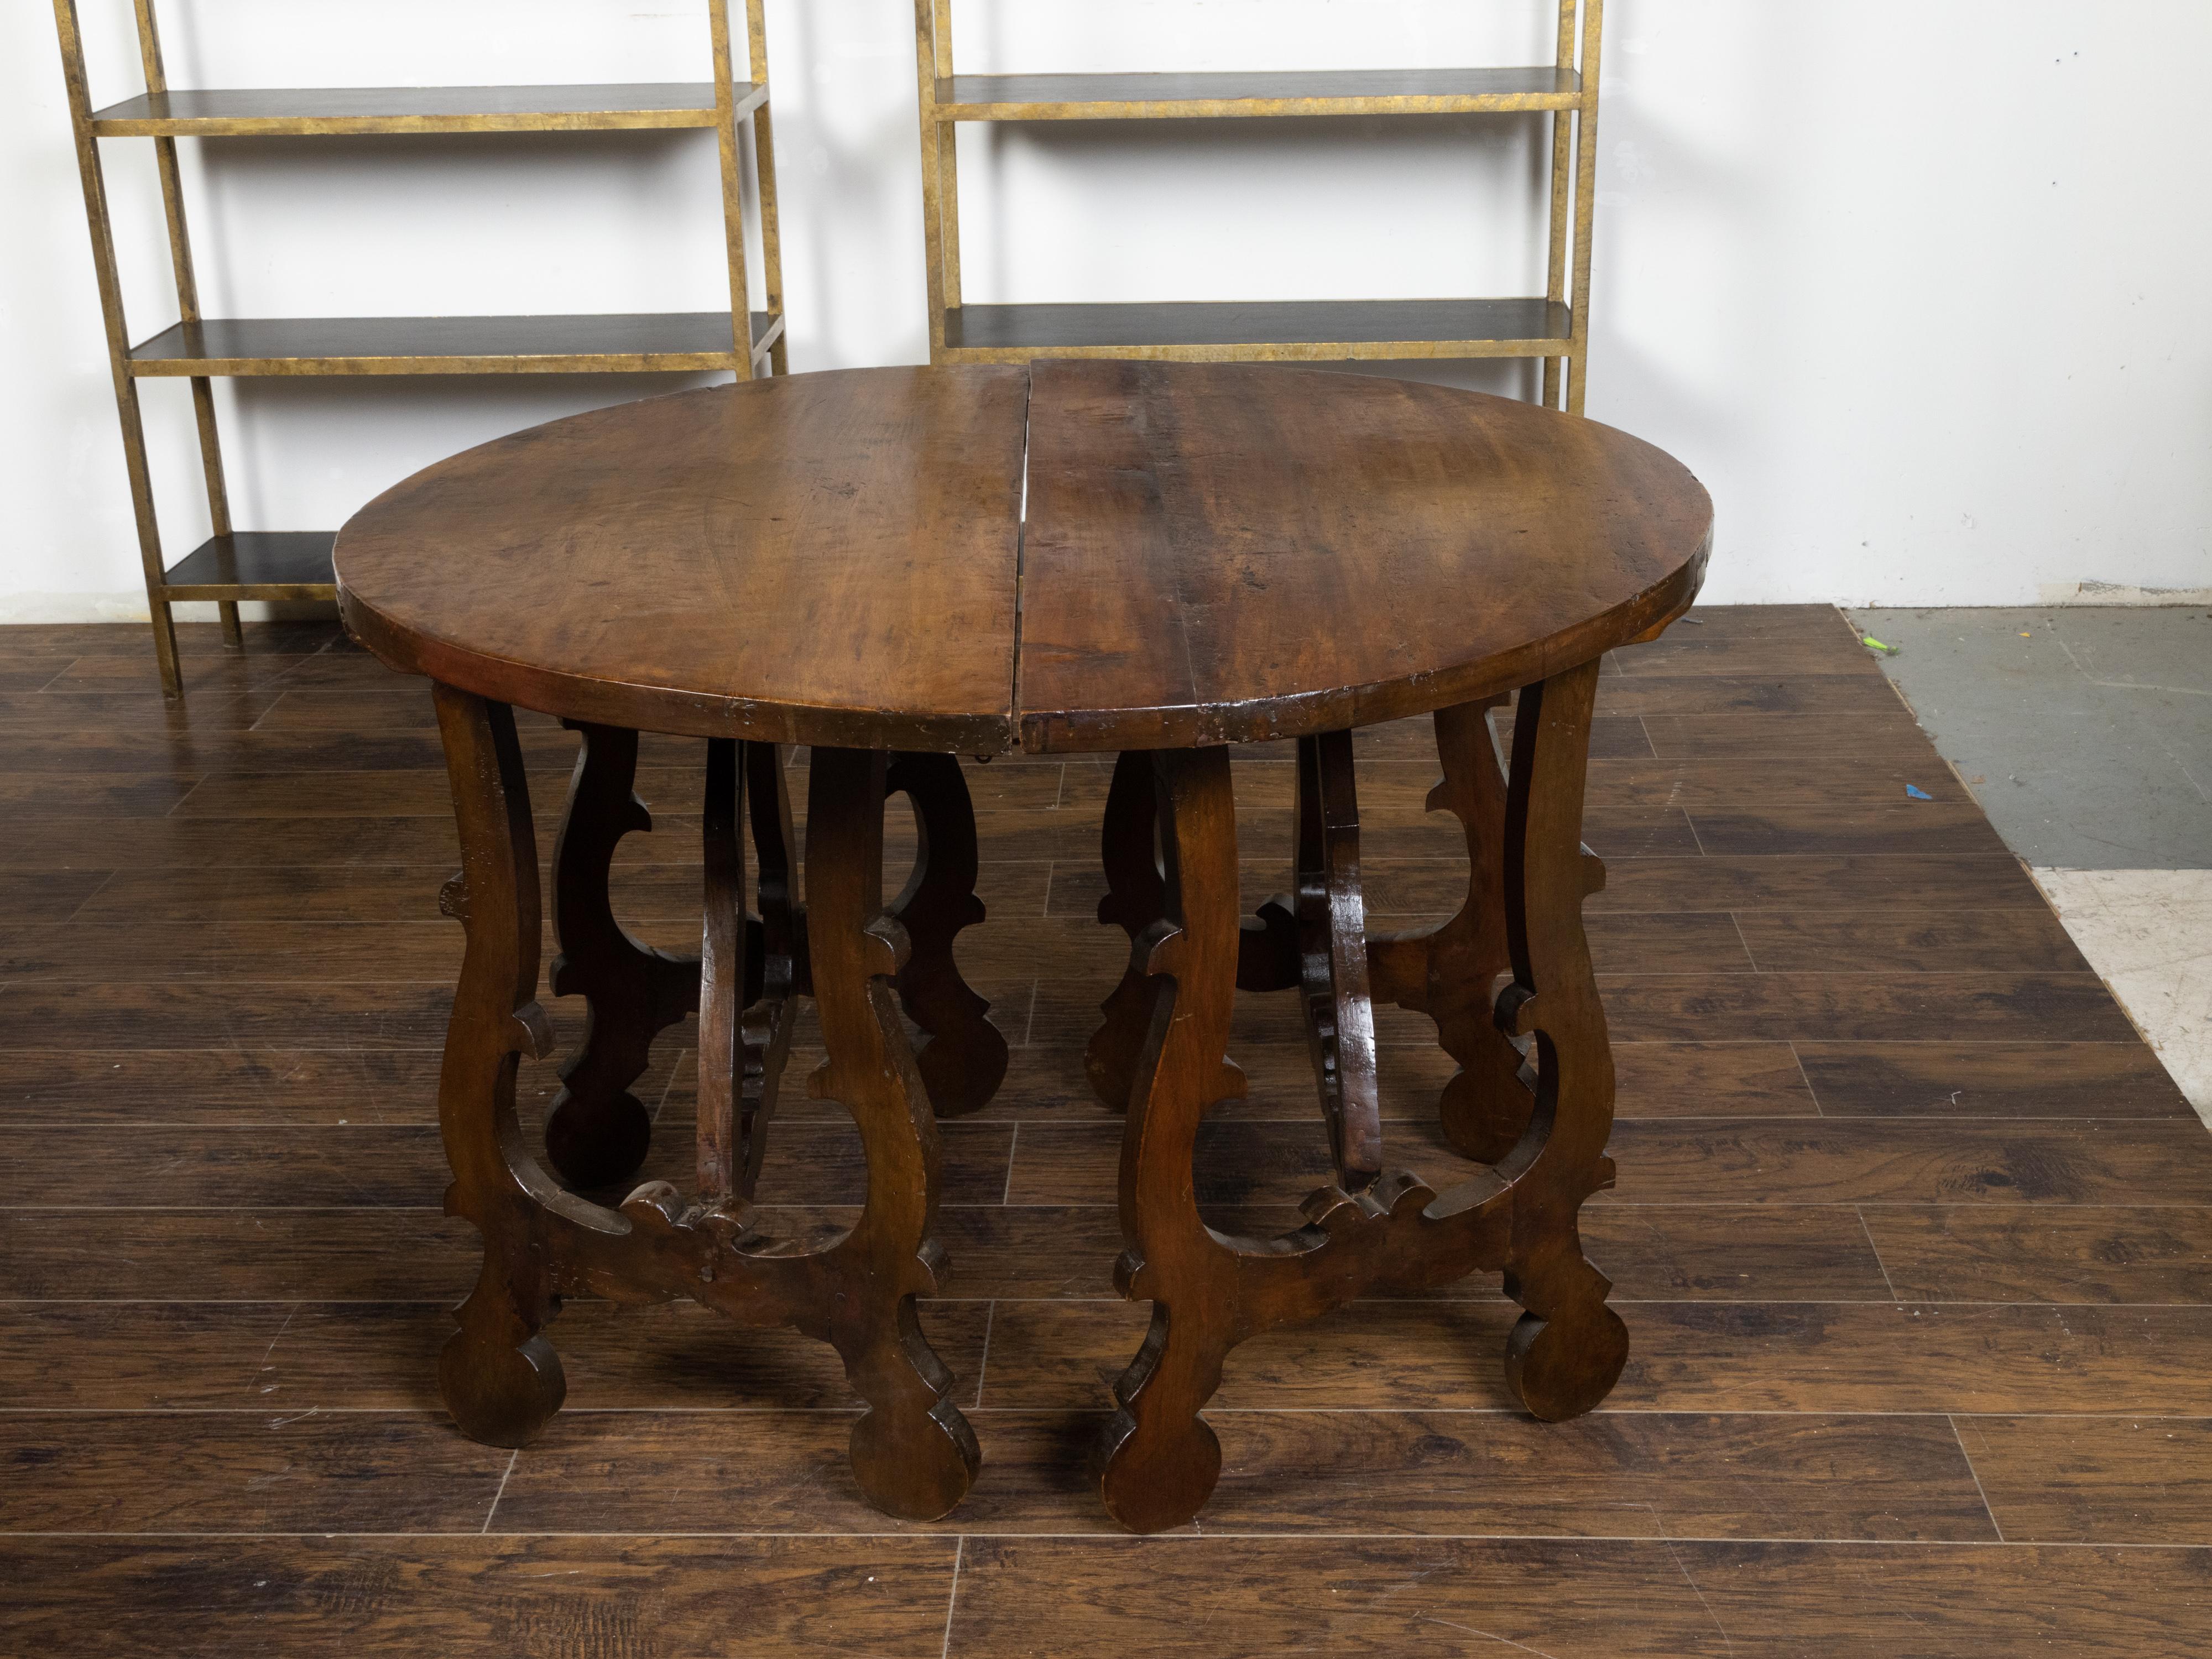 Three-Piece Italian Baroque Style Oval Top Table with Carved Lyre Shaped Legs For Sale 6